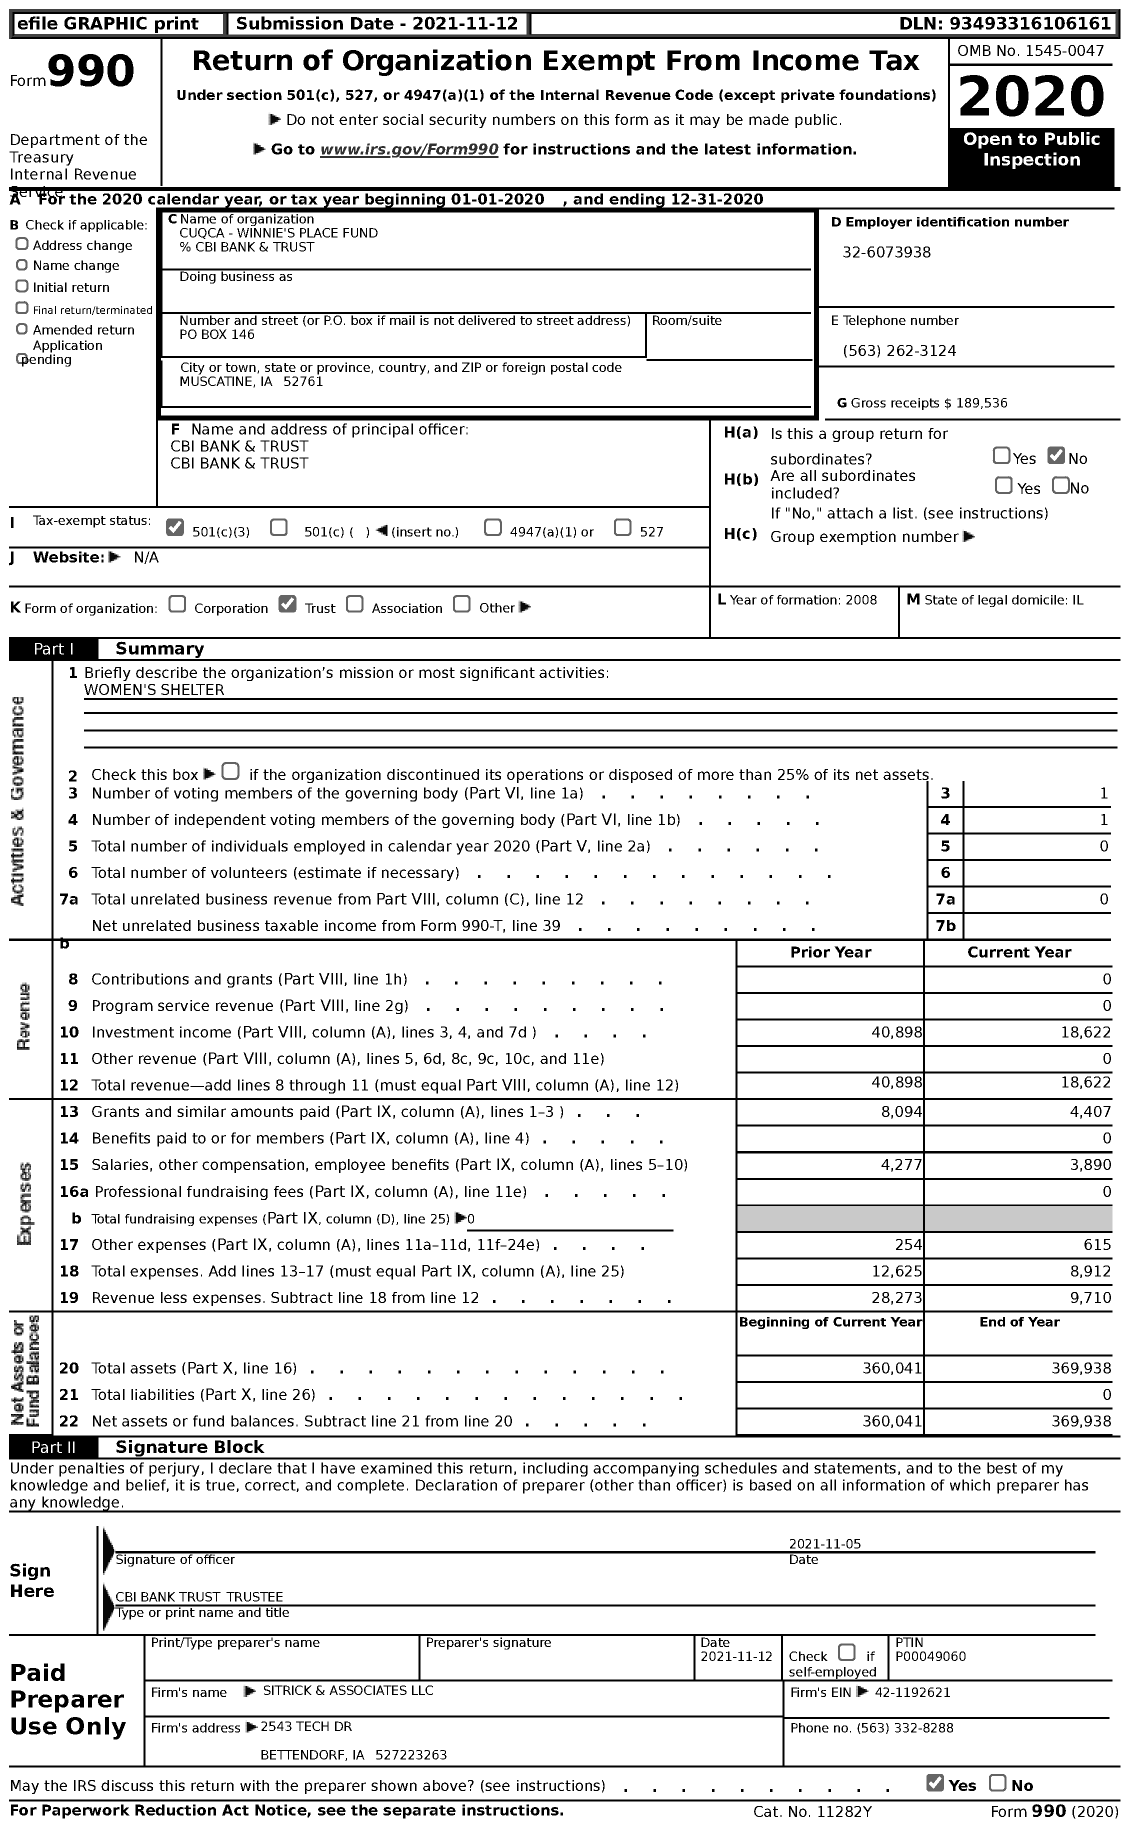 Image of first page of 2020 Form 990 for Cuqca - Winnie's Place Fund